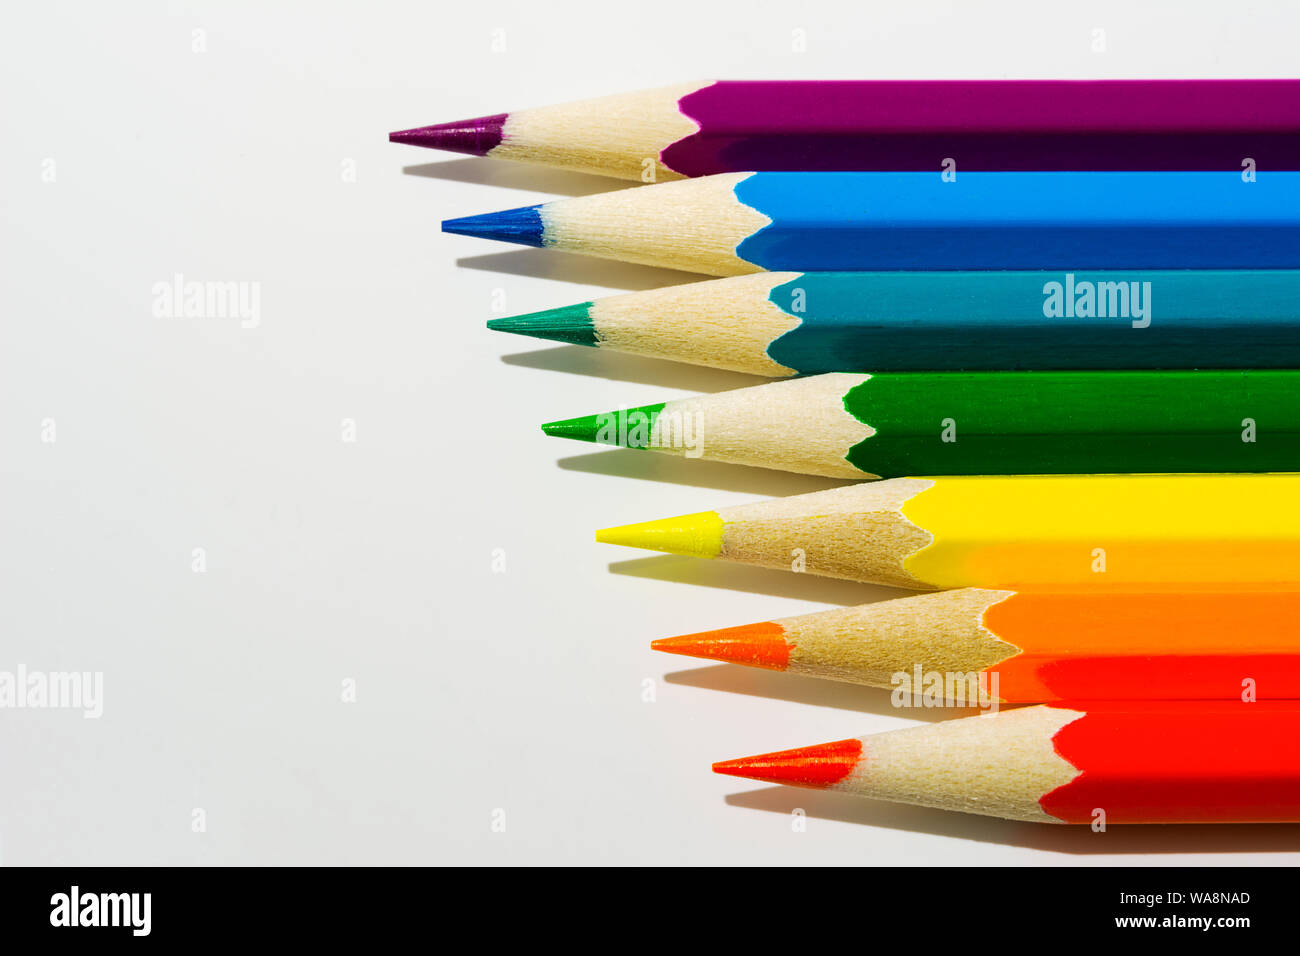 Colored pencils as a symbol of children's creativity, copy space Stock Photo